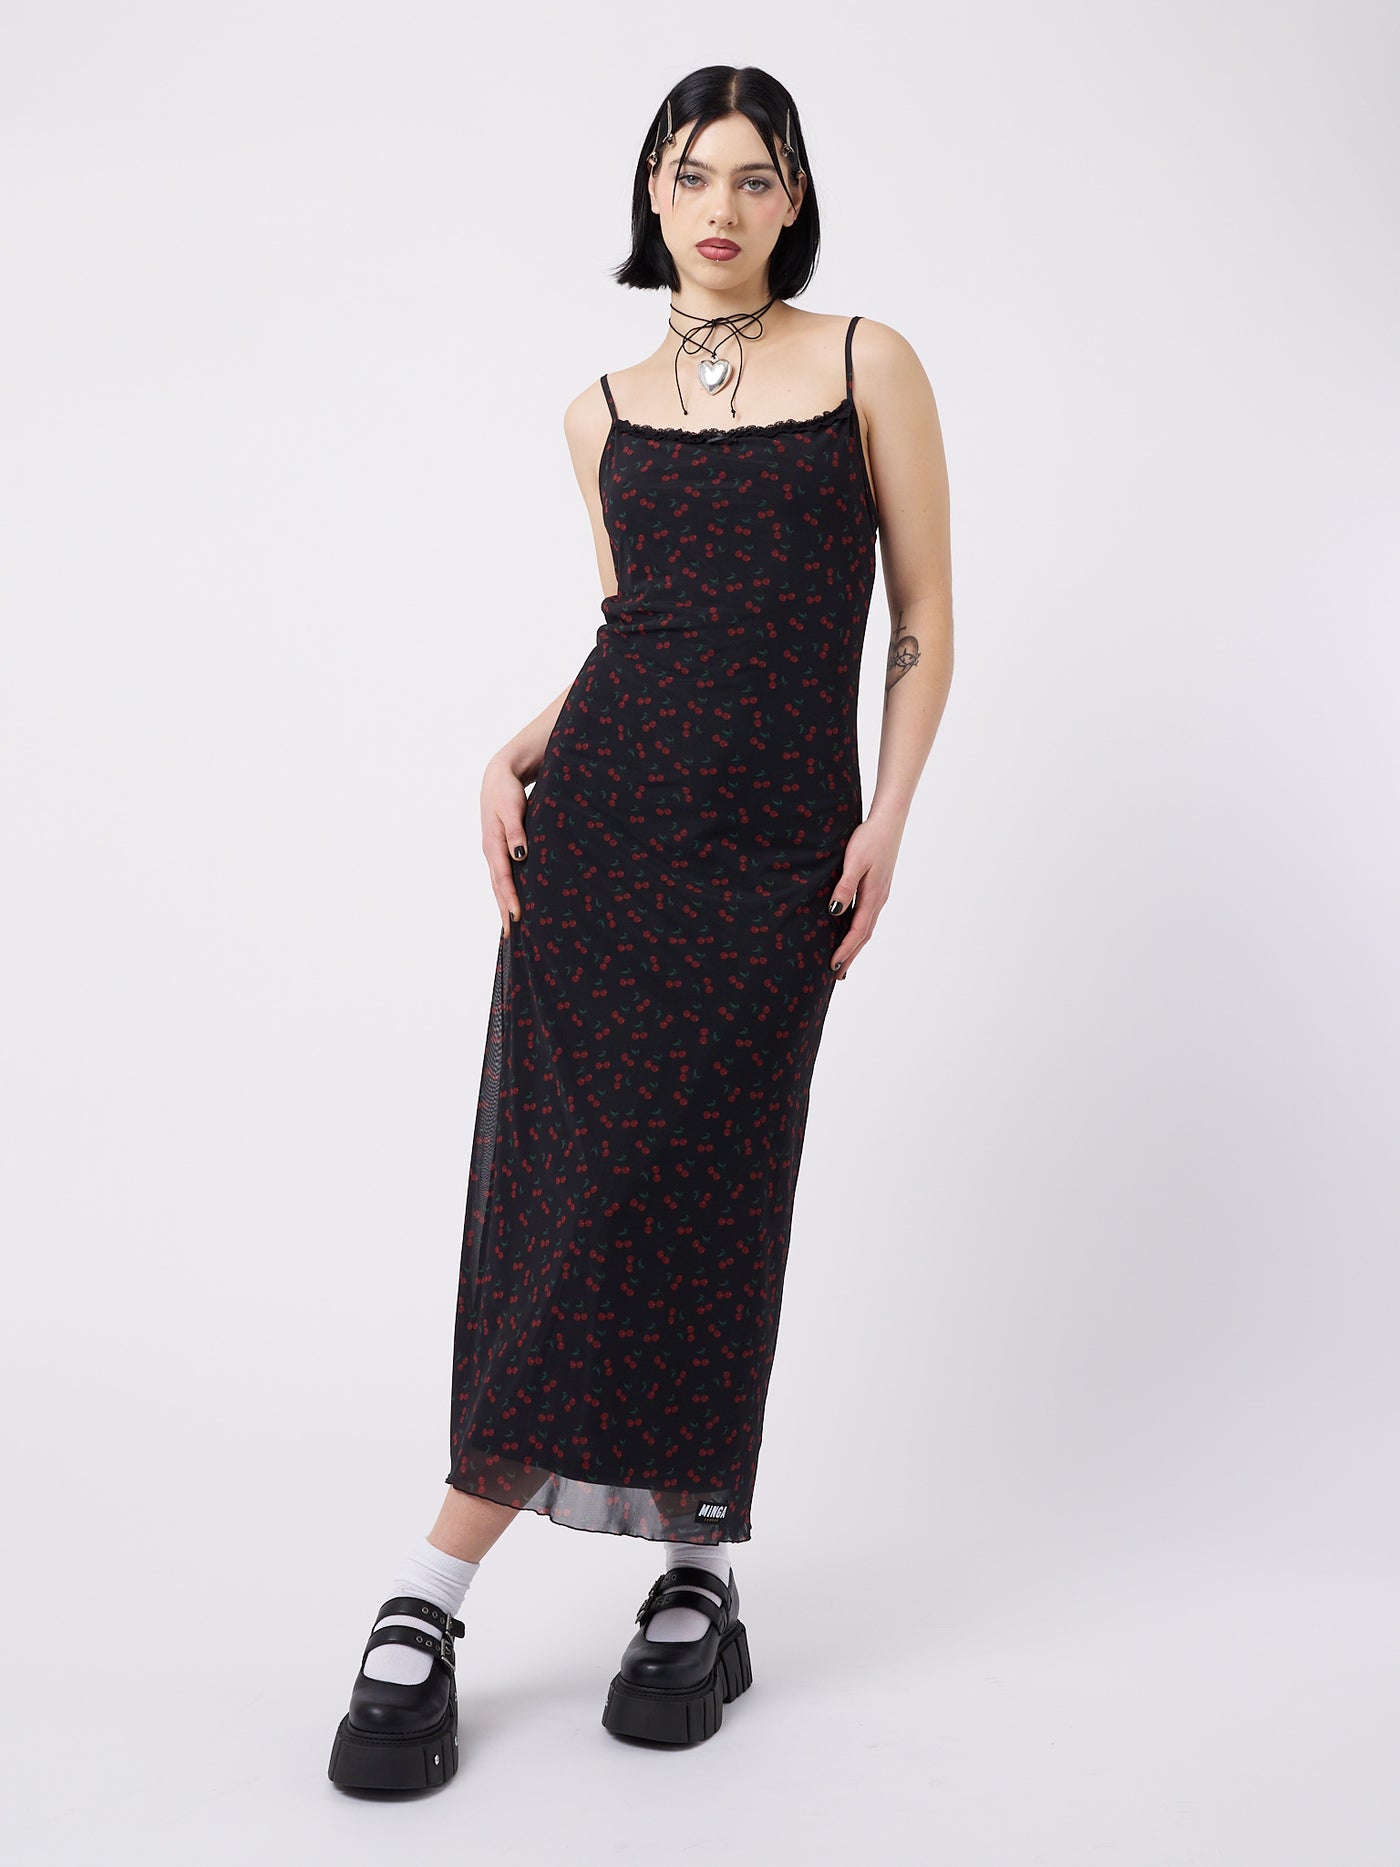 A mesh maxi dress with cherries print in black by Minga London. This skirt features a flirty and airy design, perfect for adding a playful and trendy touch to your outfit.